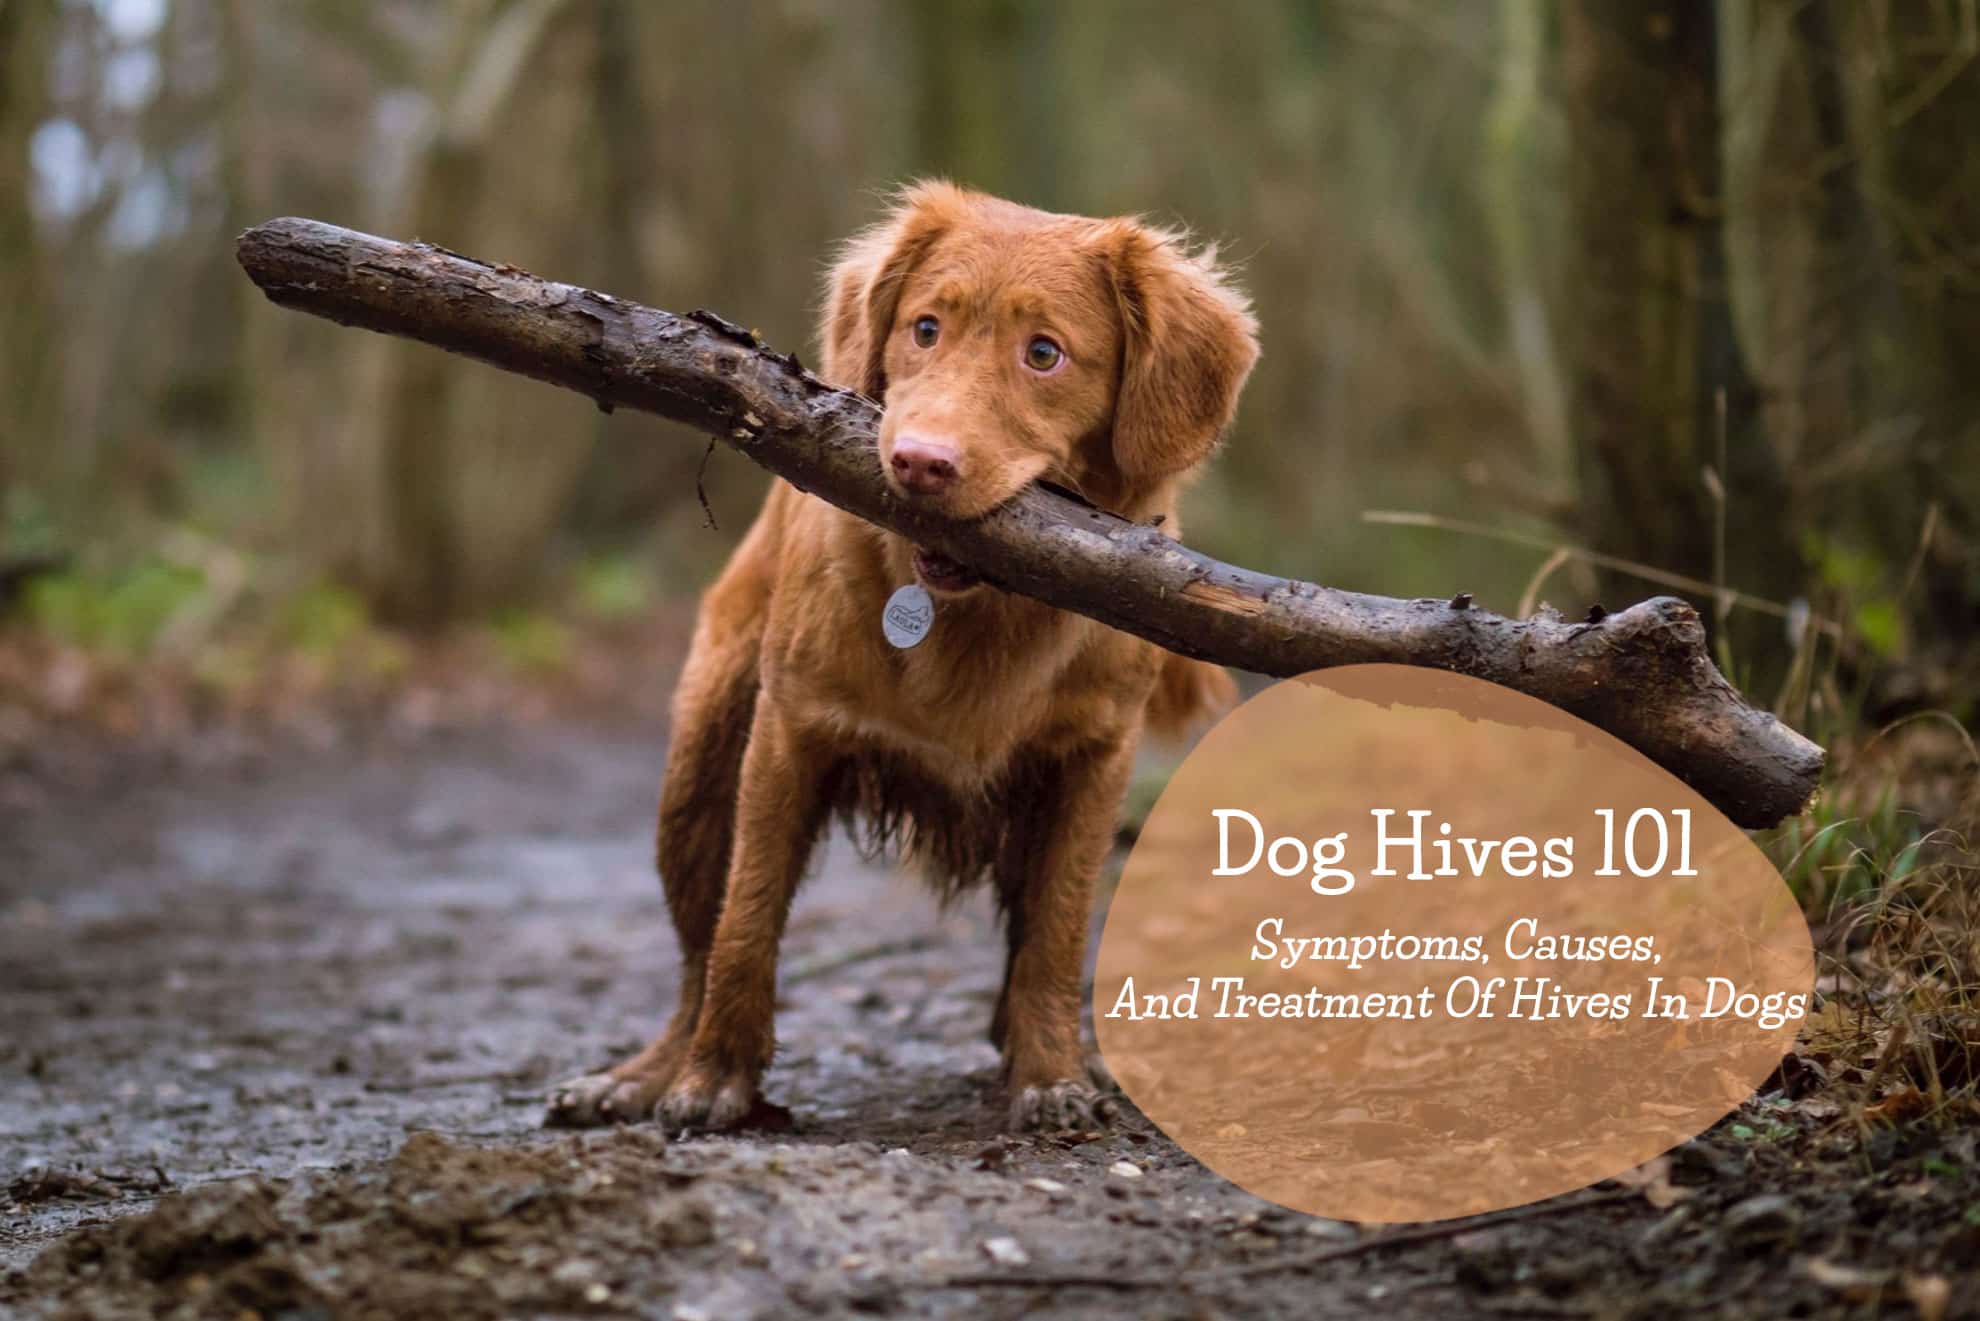 how long does it take for dog hives to go away